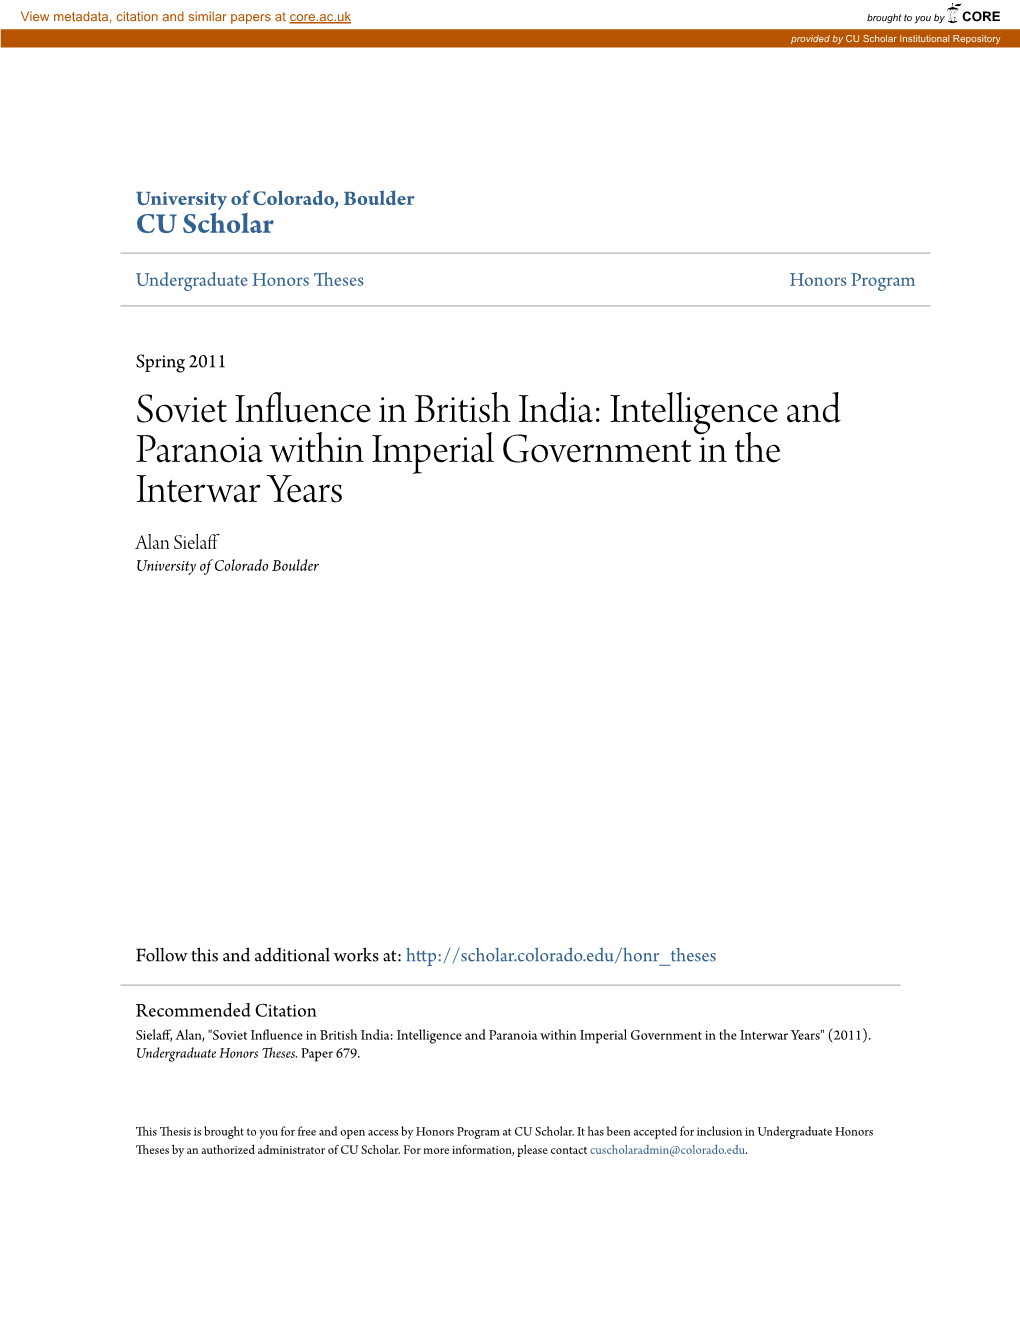 Soviet Influence in British India: Intelligence and Paranoia Within Imperial Government in the Interwar Years Alan Sielaff University of Colorado Boulder